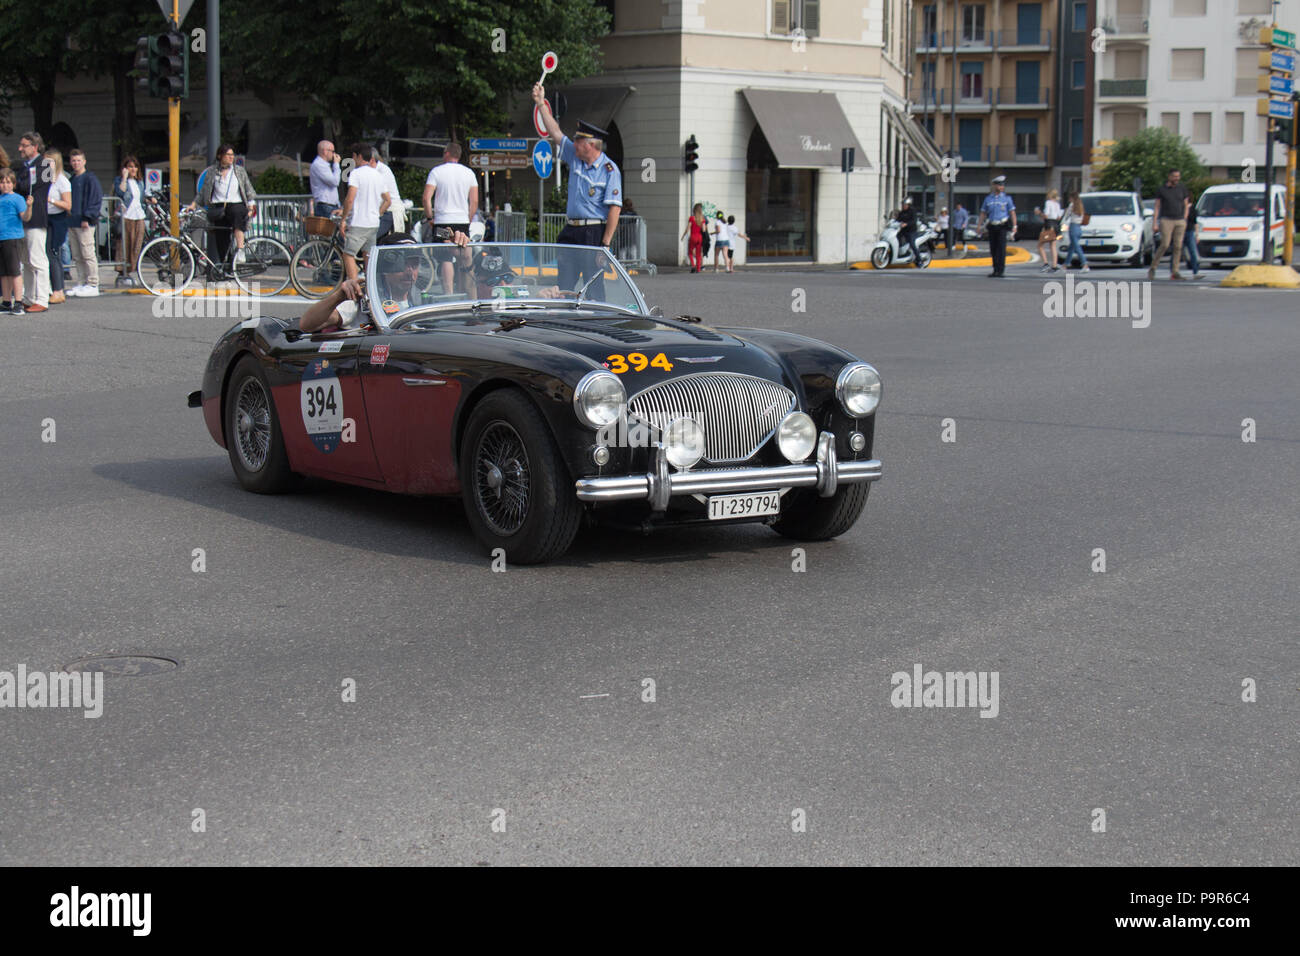 Brescia, Italy - May 19 2018: AUSTIN HEALEY 100 M BN2 1955 is an old racing car in rally Mille Miglia 2018, the famous italian historical race on May  Stock Photo